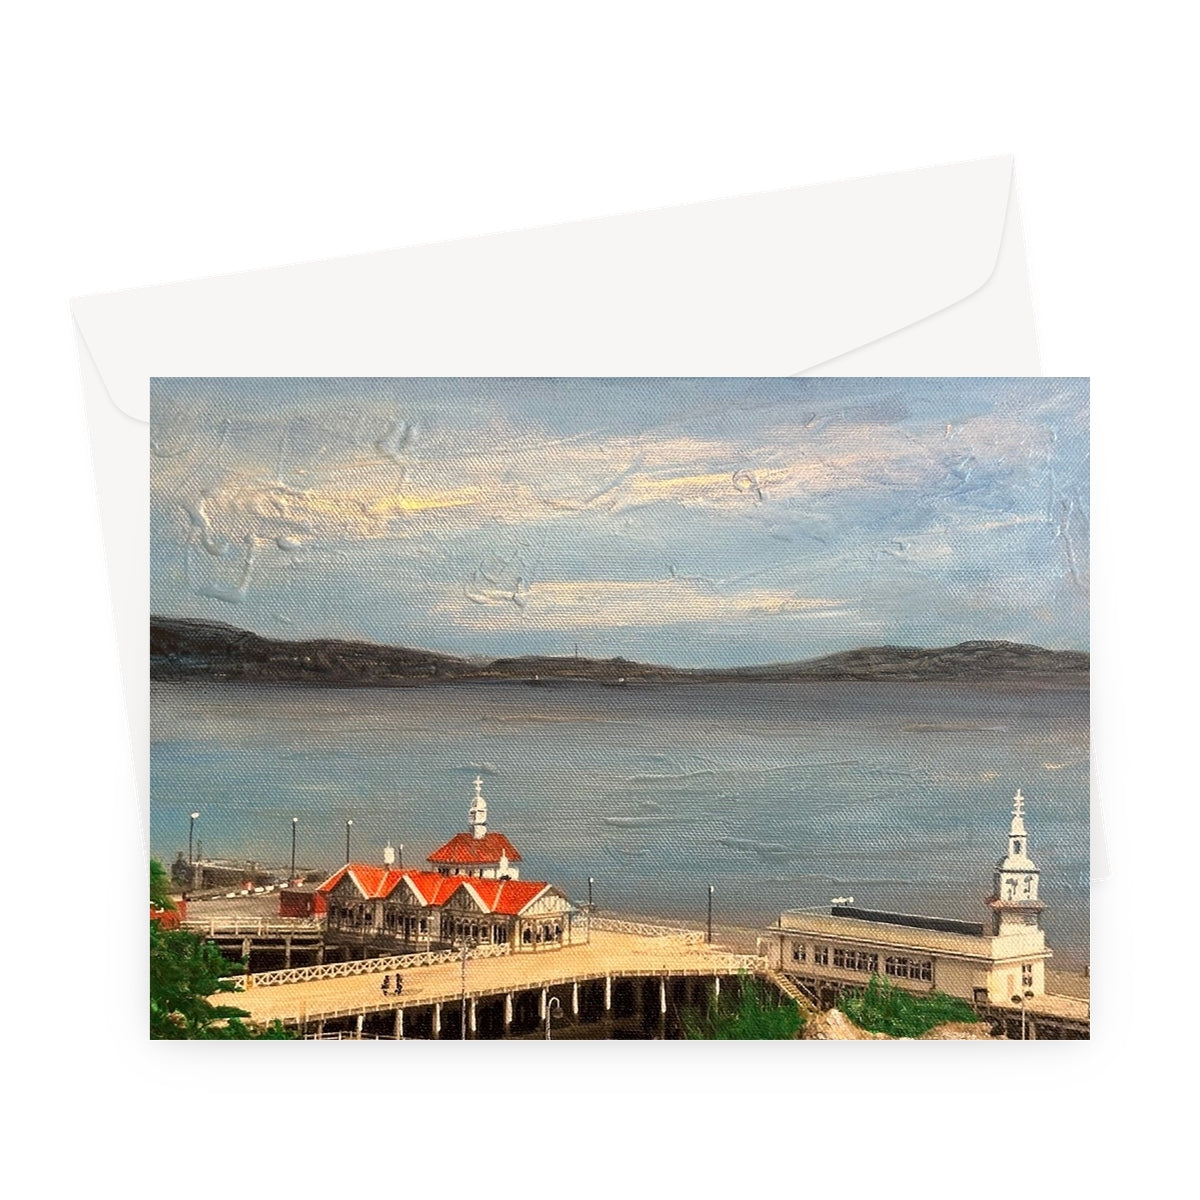 Looking From Dunoon Art Gifts Greeting Card-Stationery-River Clyde Art Gallery-A5 Landscape-10 Cards-Paintings, Prints, Homeware, Art Gifts From Scotland By Scottish Artist Kevin Hunter